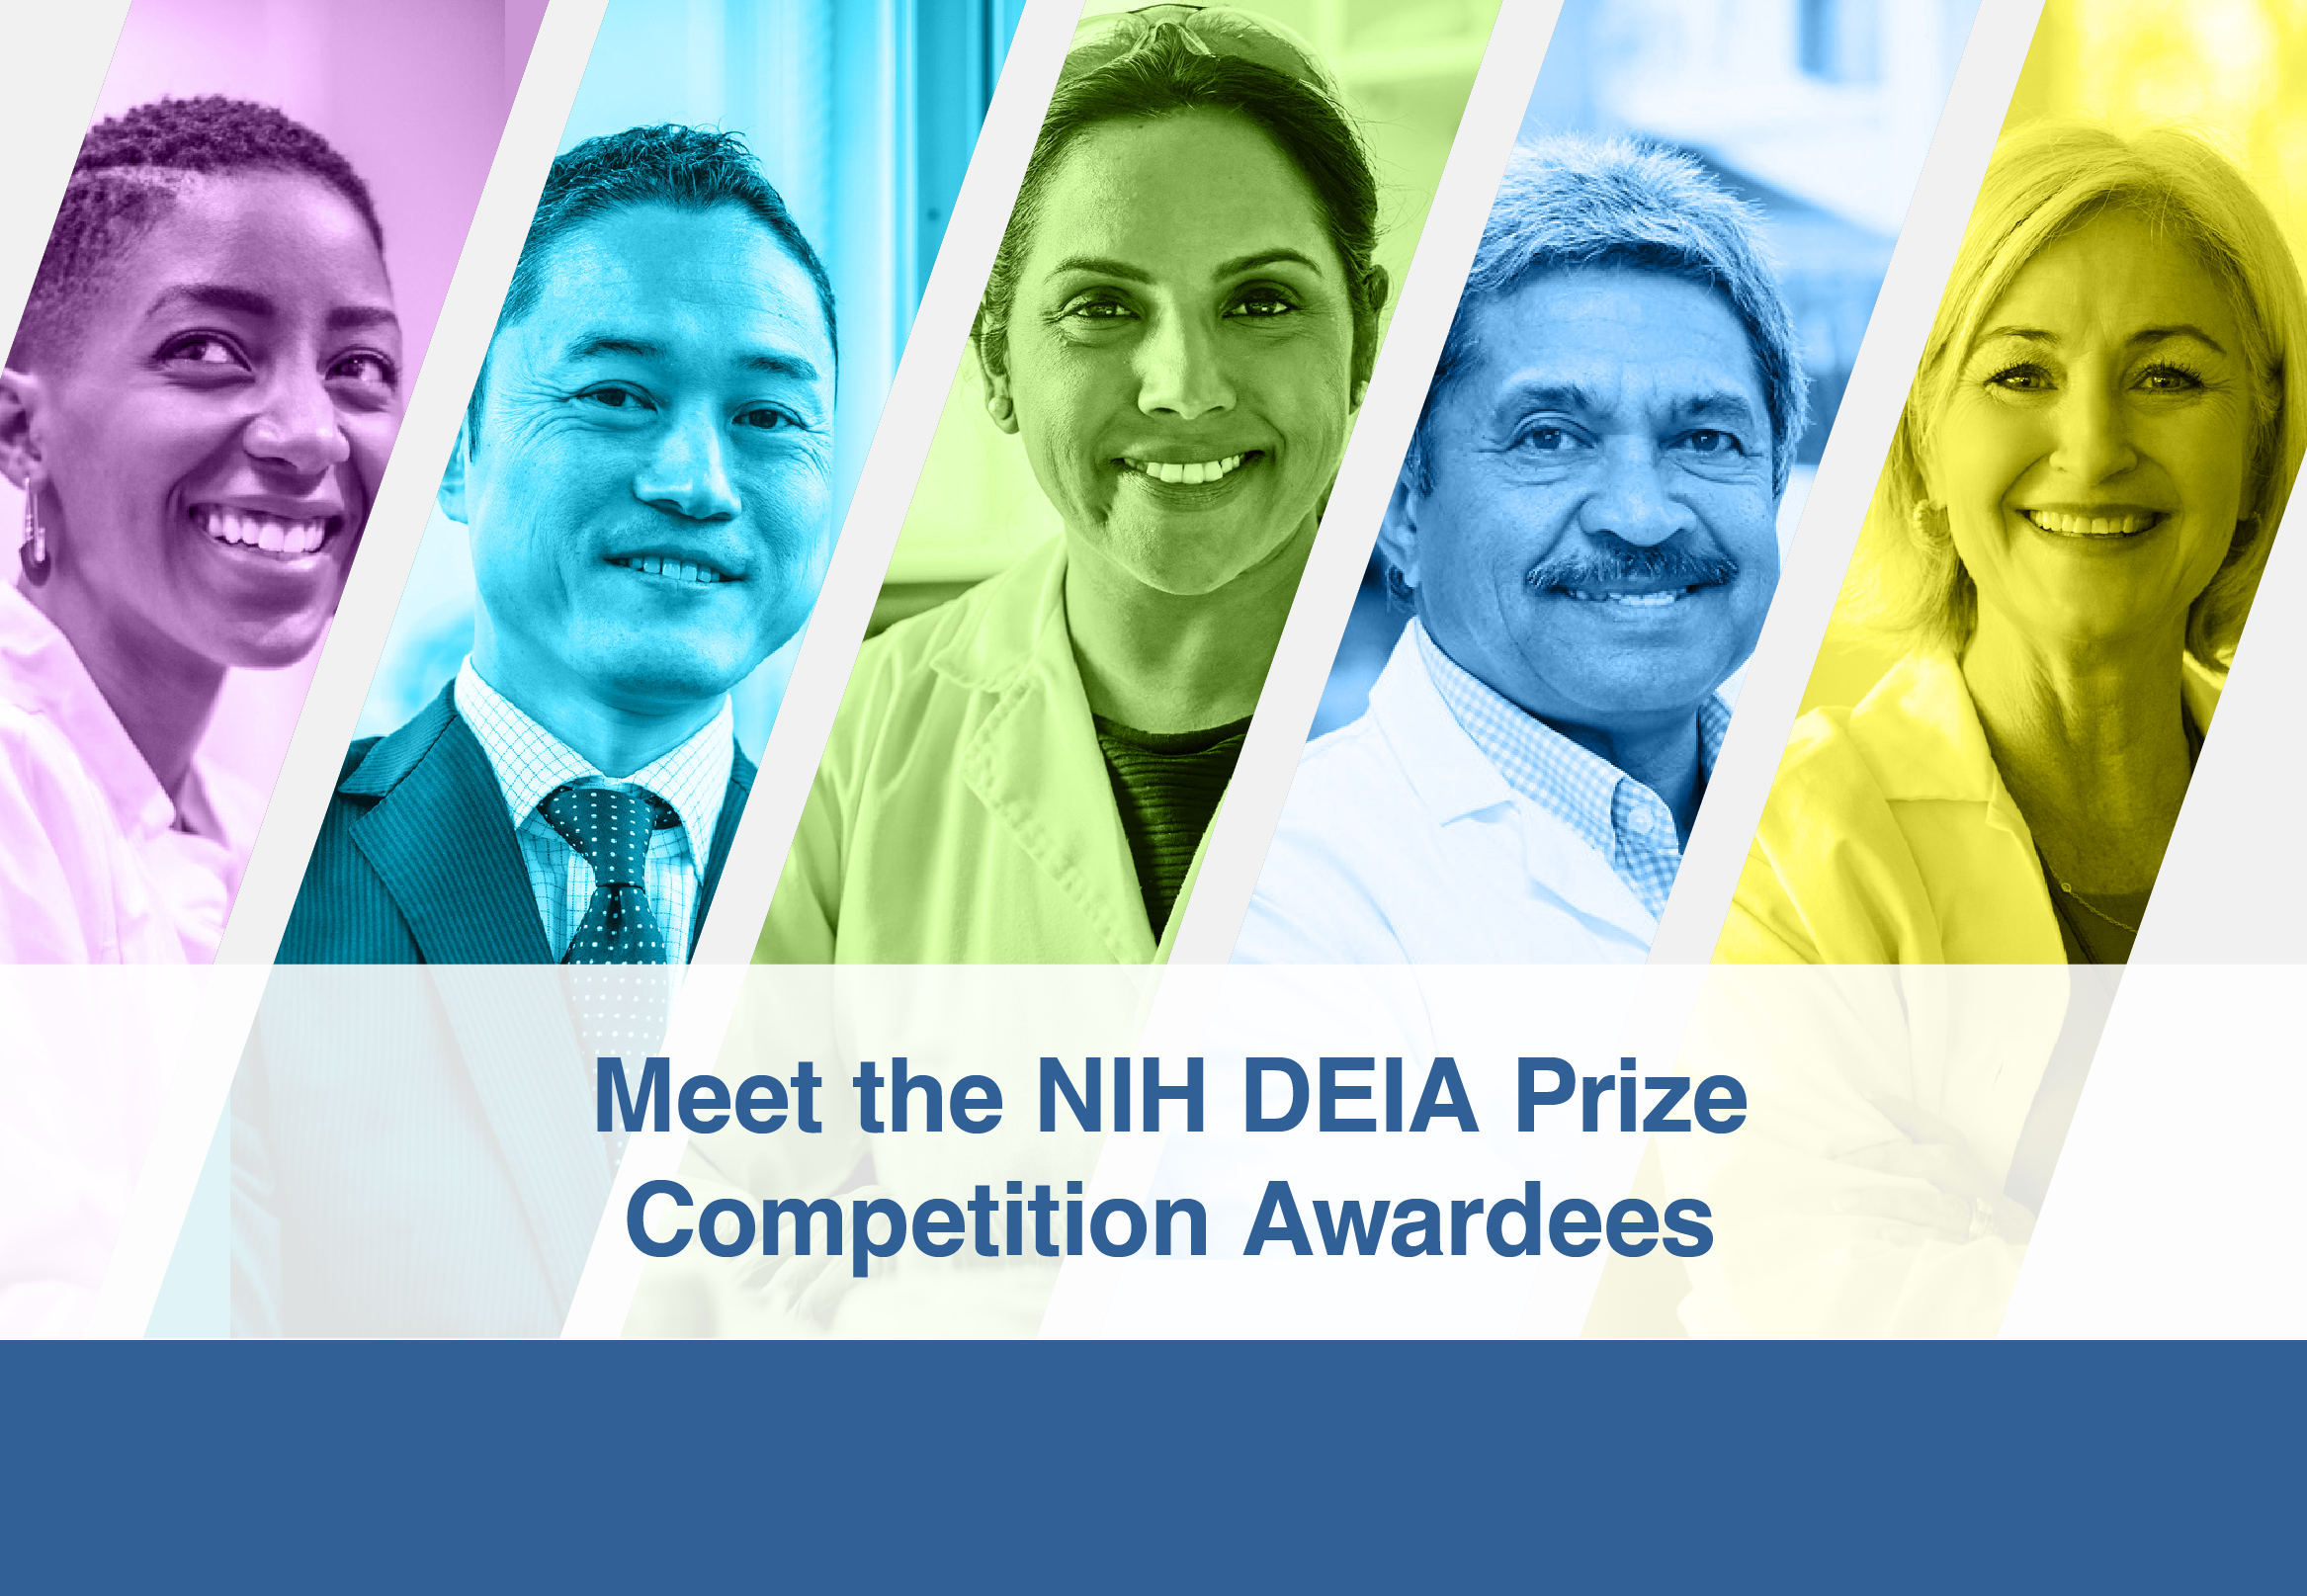 Meet the NIH DEIA Prize Competition Awardees. Images of five diverse people.